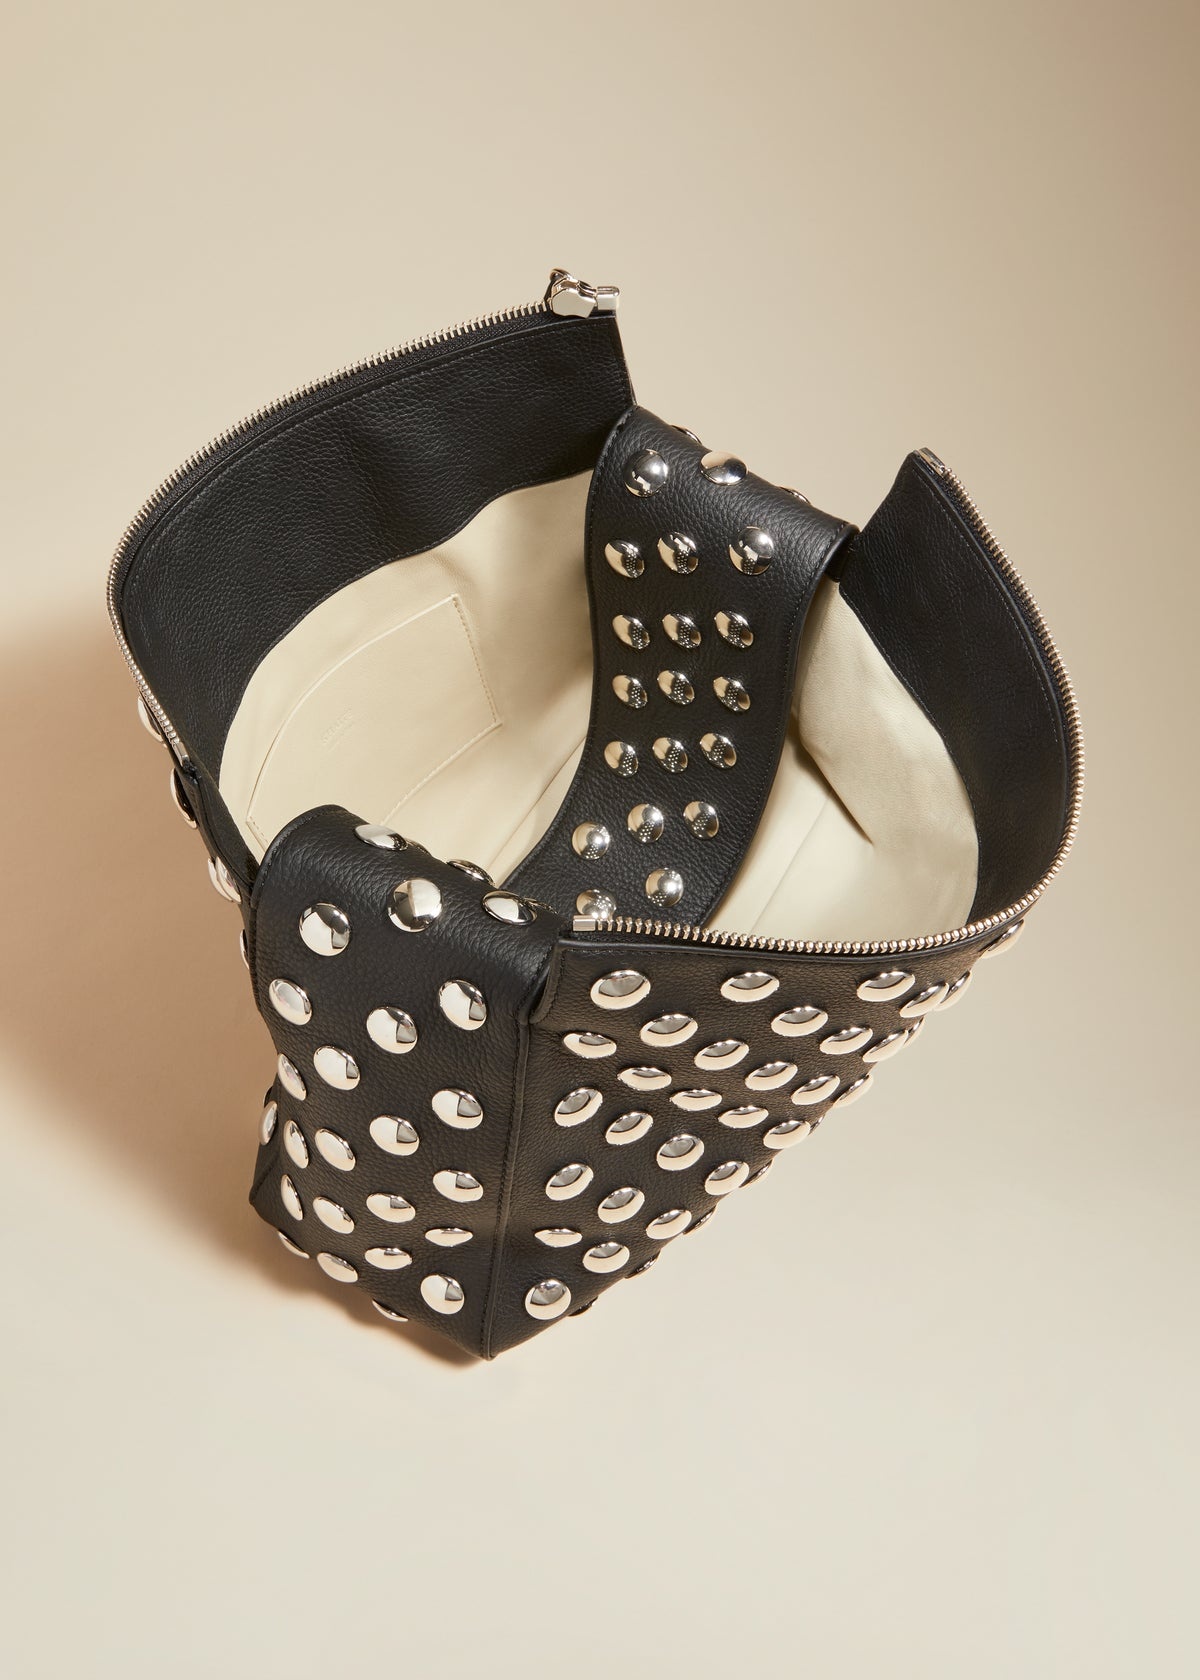 The Elena Bag in Black Leather with Studs - 4